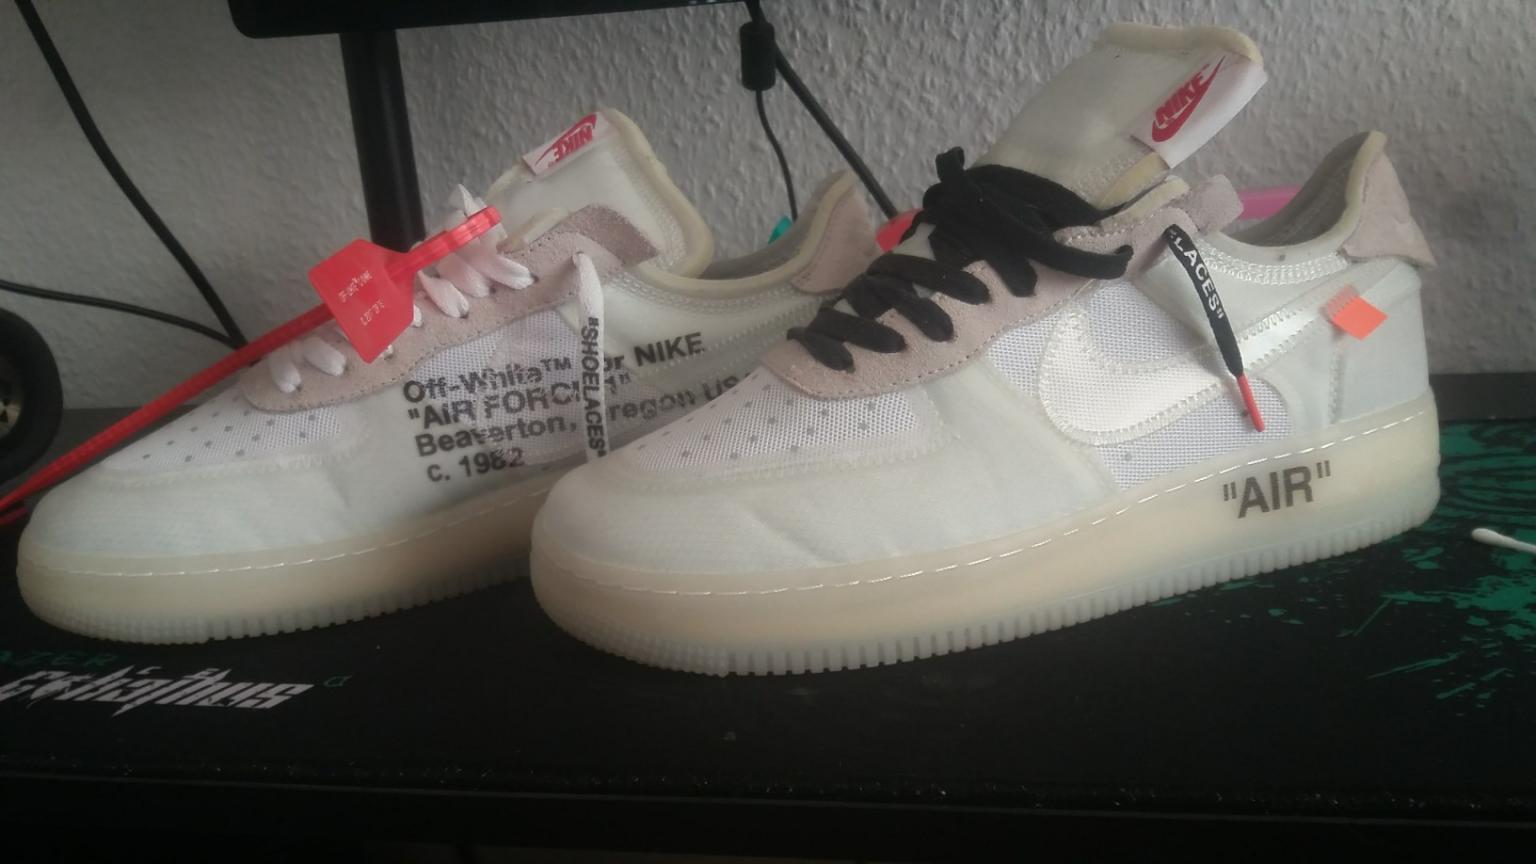 Nike X Off White Air Force One Ua In Sandersdorf Brehna For 100 00 For Sale Shpock